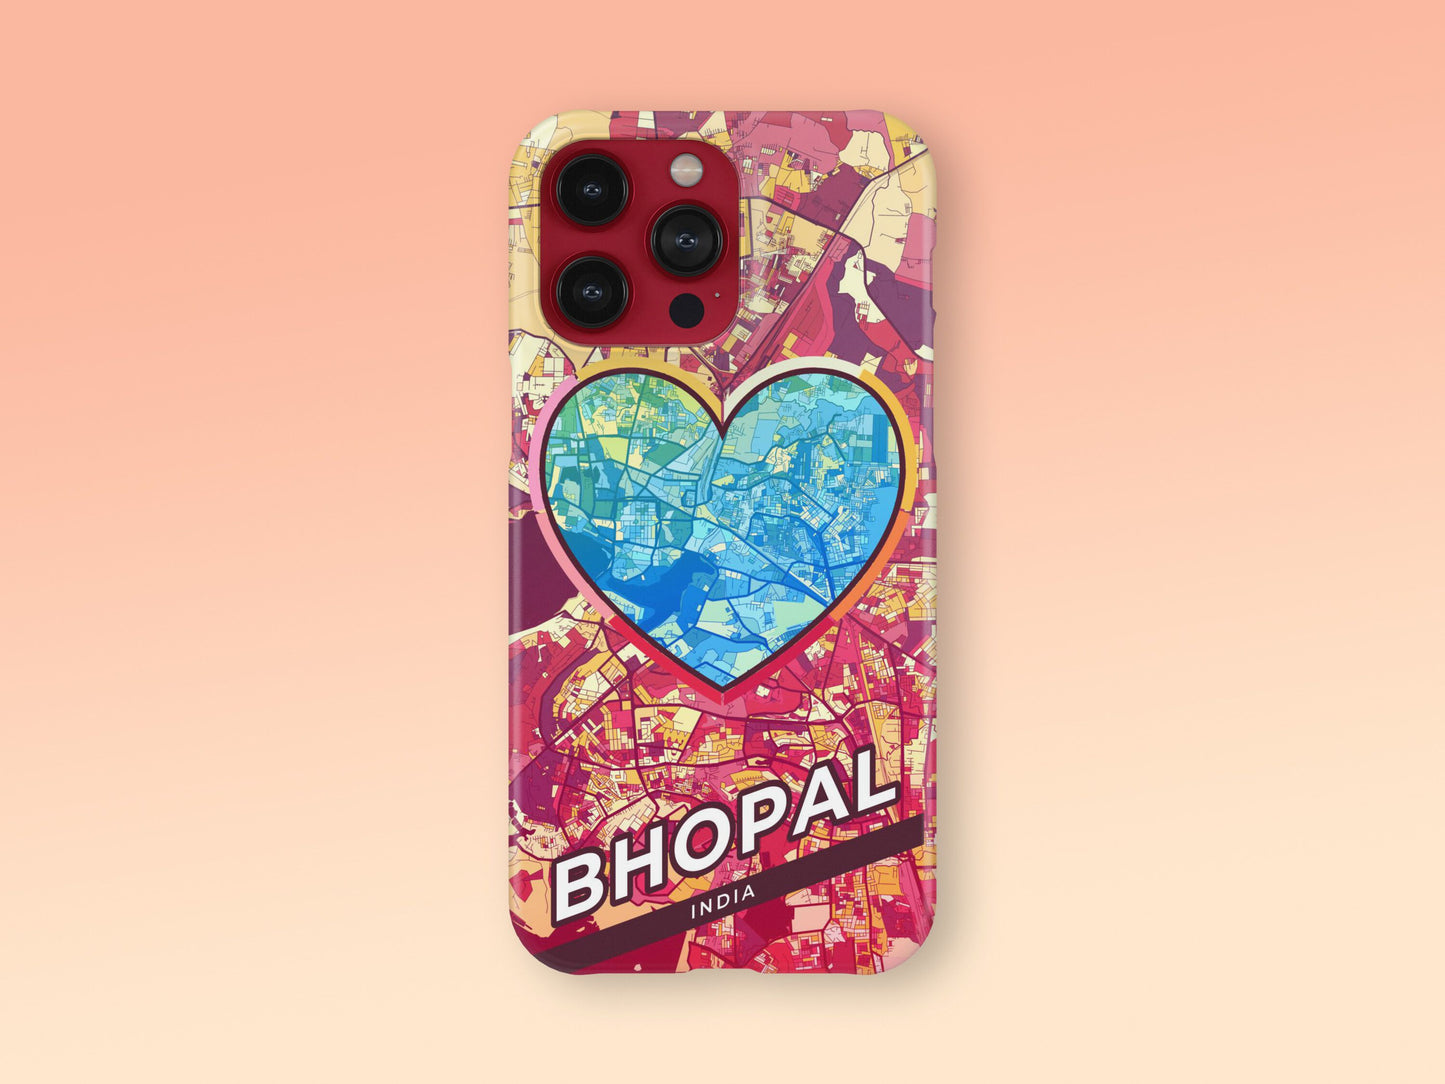 Bhopal India slim phone case with colorful icon. Birthday, wedding or housewarming gift. Couple match cases. 2